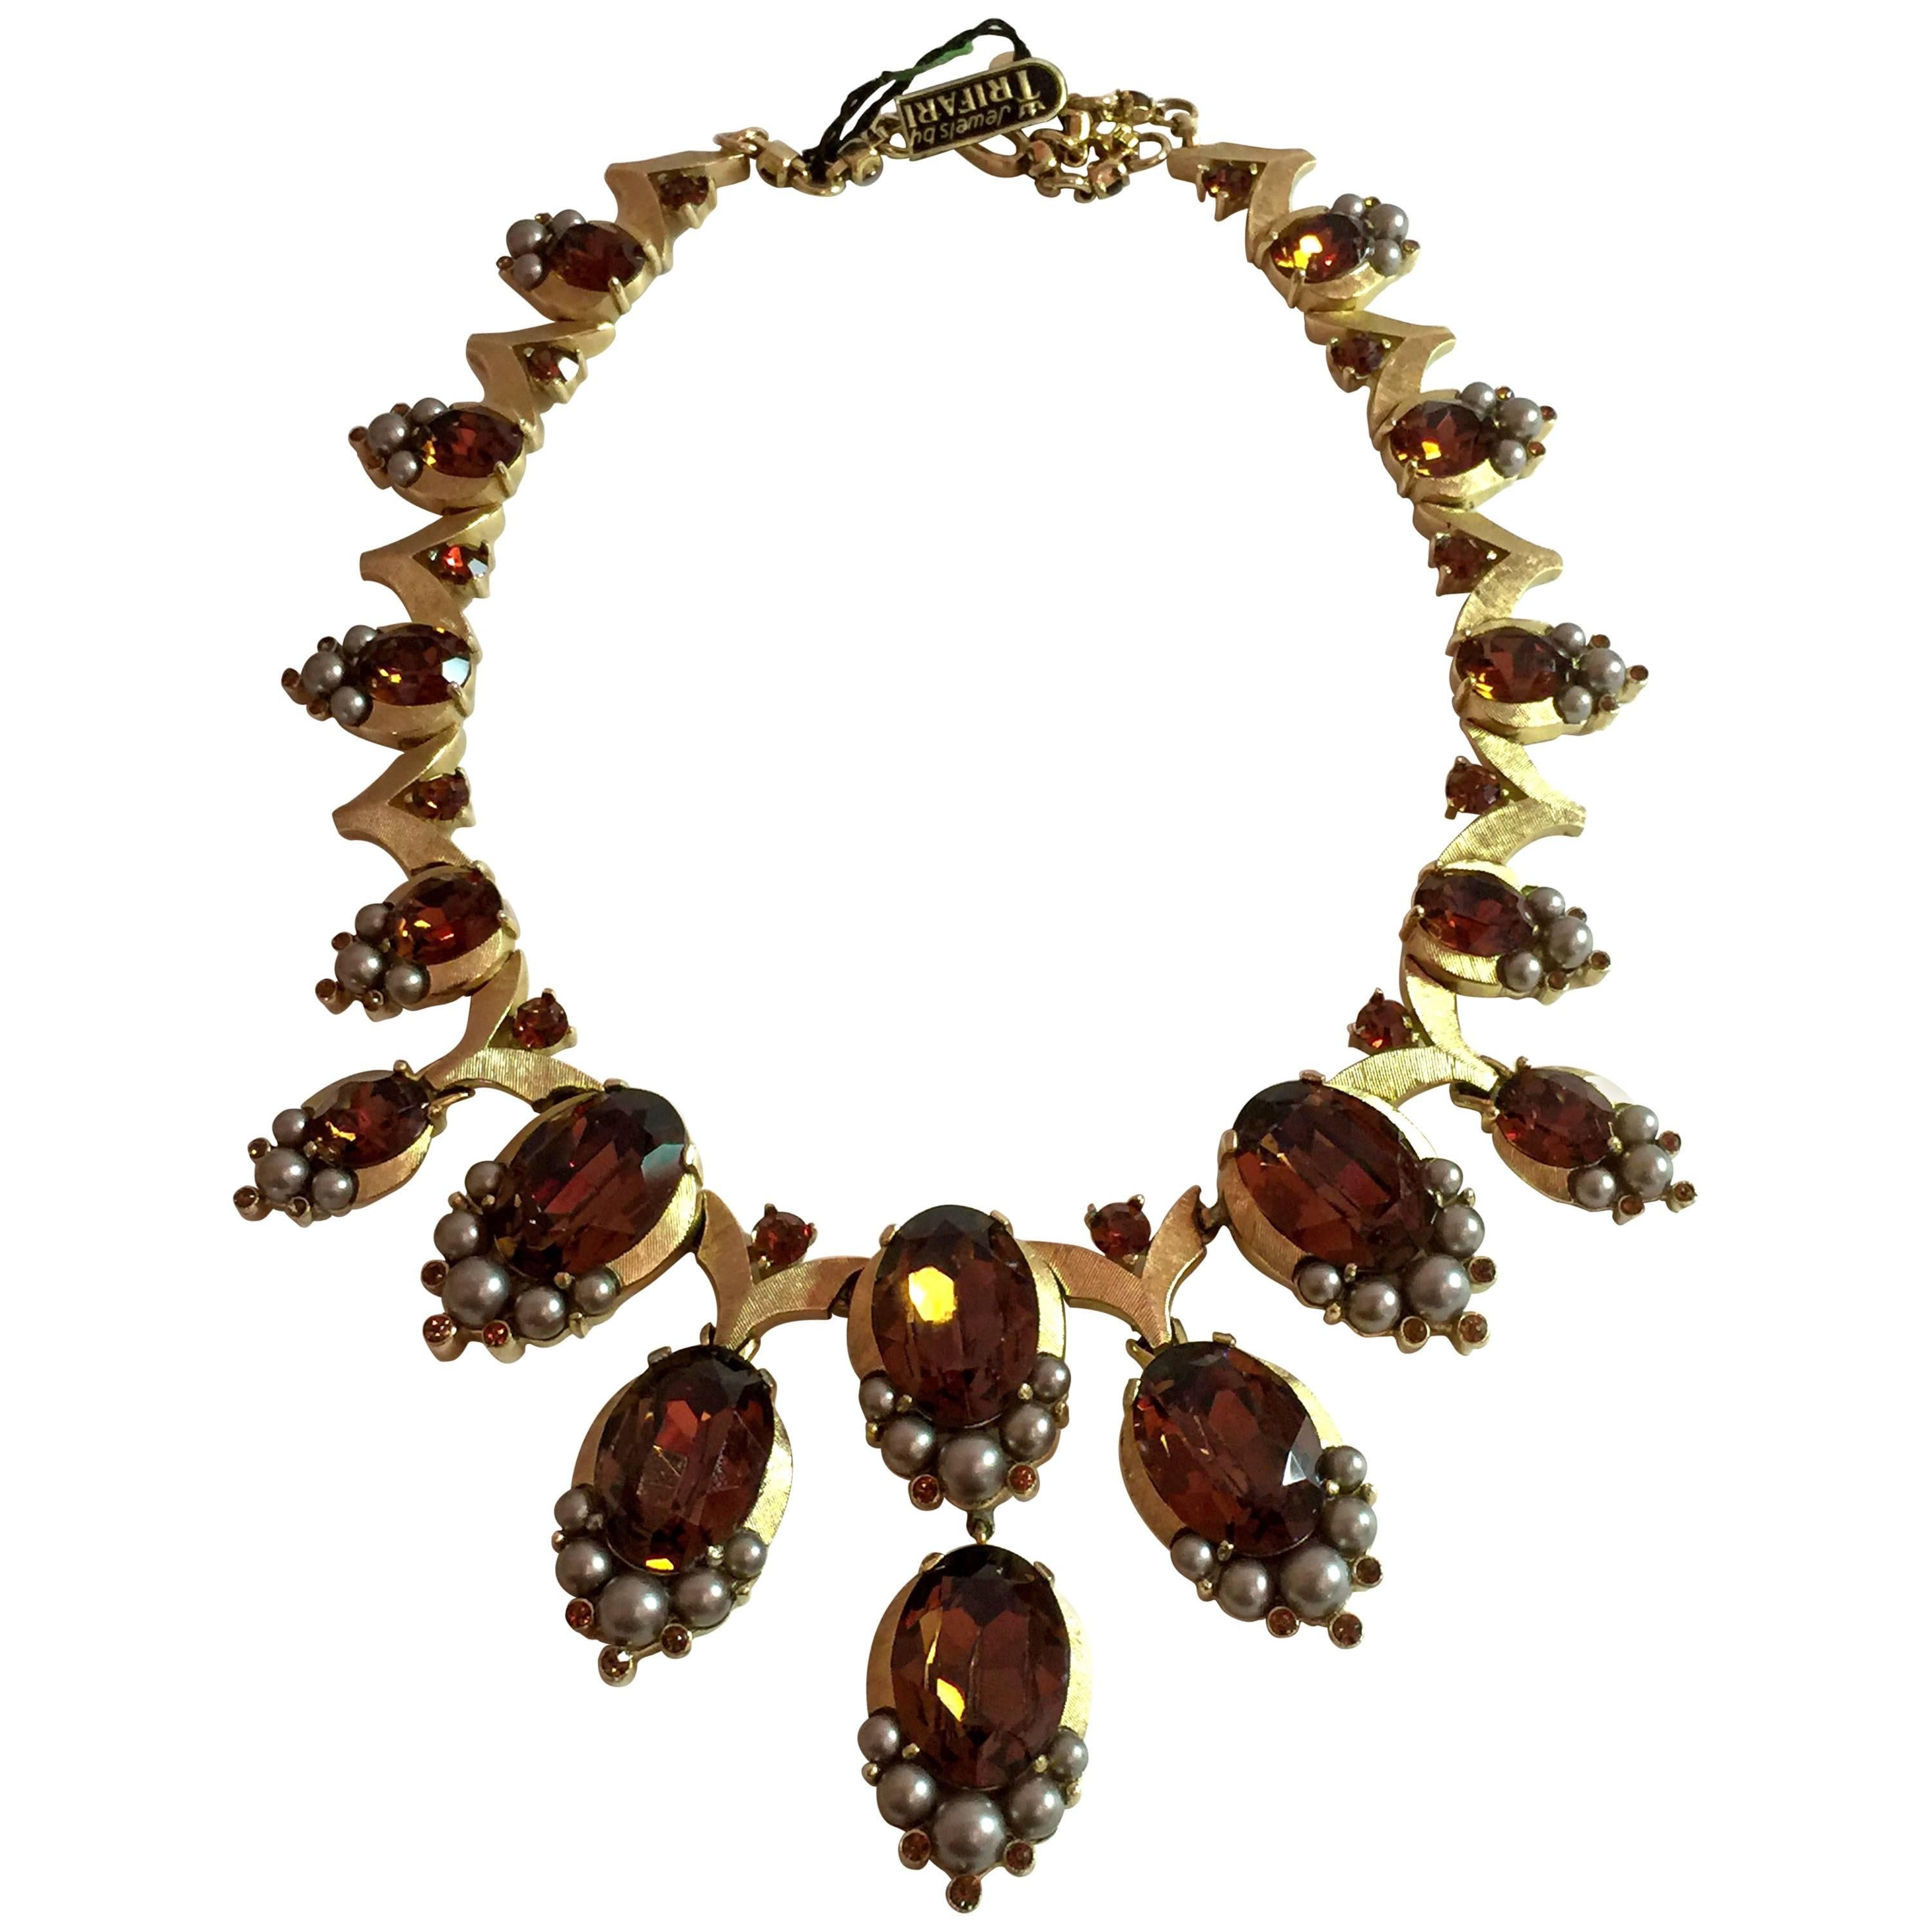 Glamorous 1950s TRIFARI Brushed Matte Goldtone Faux Topaz & Smoke Pearl Necklace For Sale